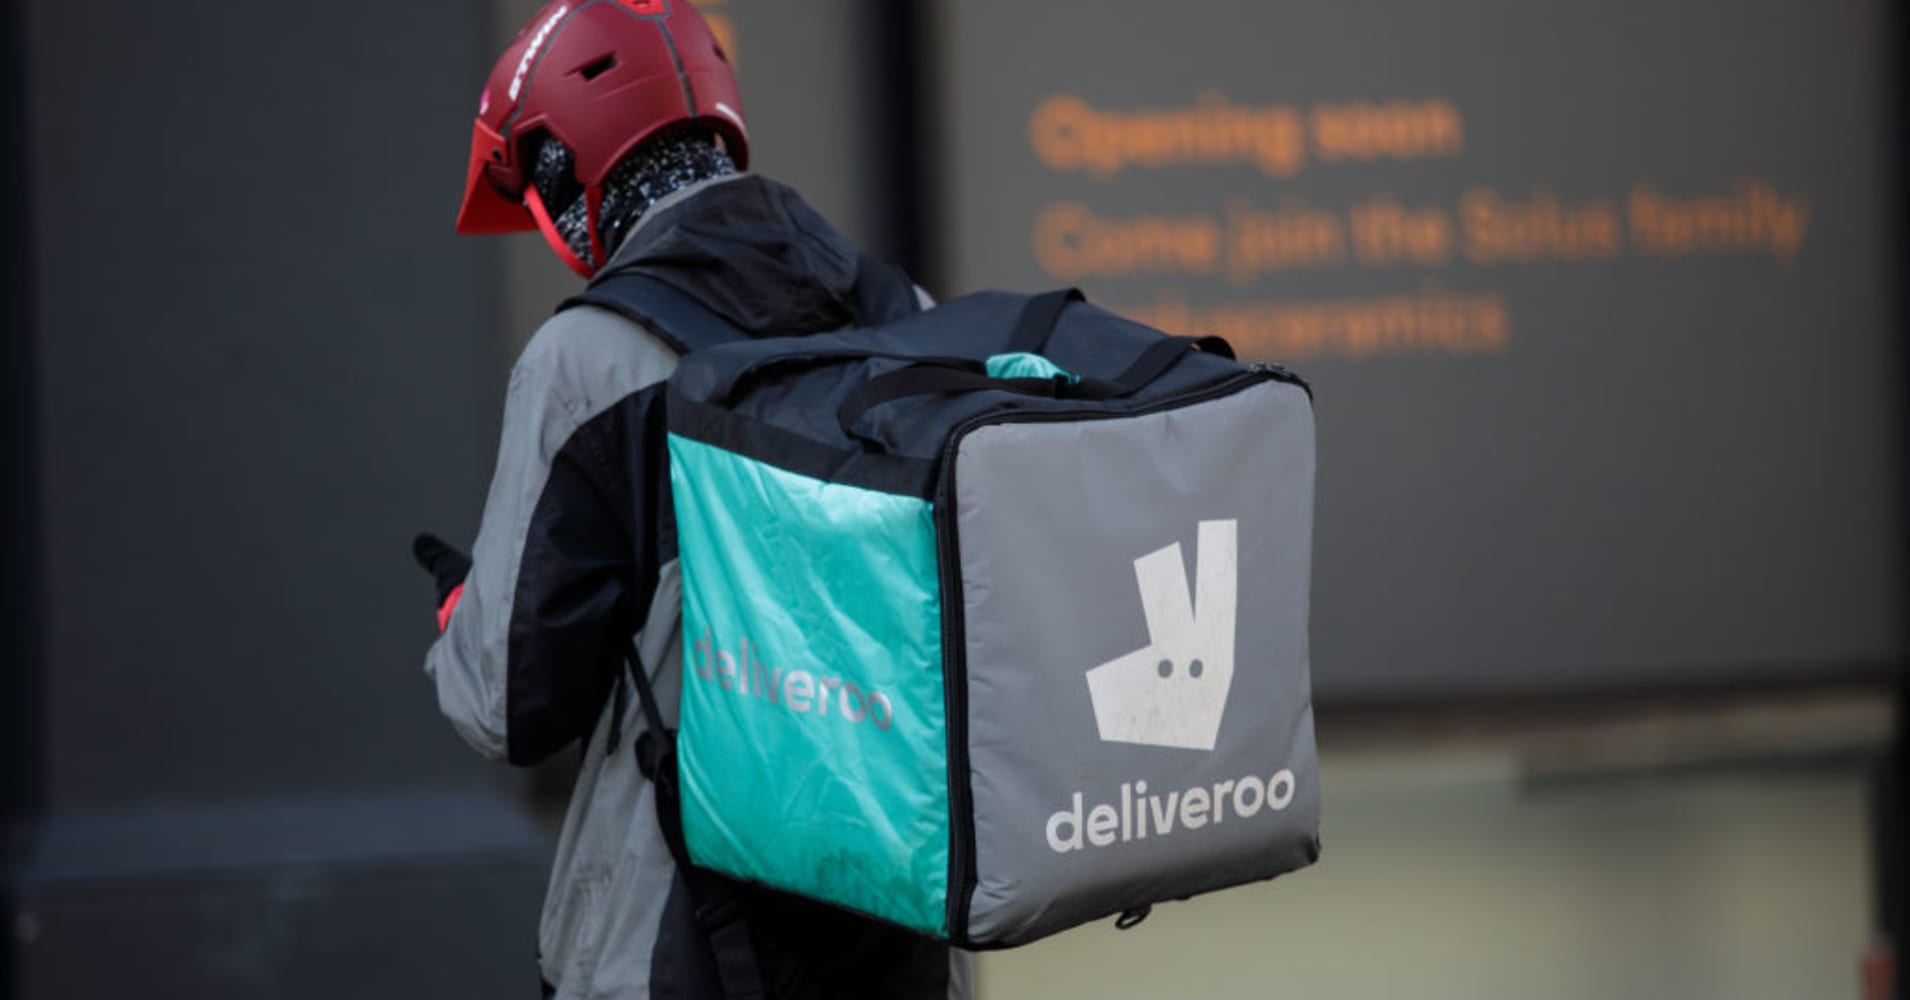 Image result for Uber in talks to buy food delivery company Deliveroo